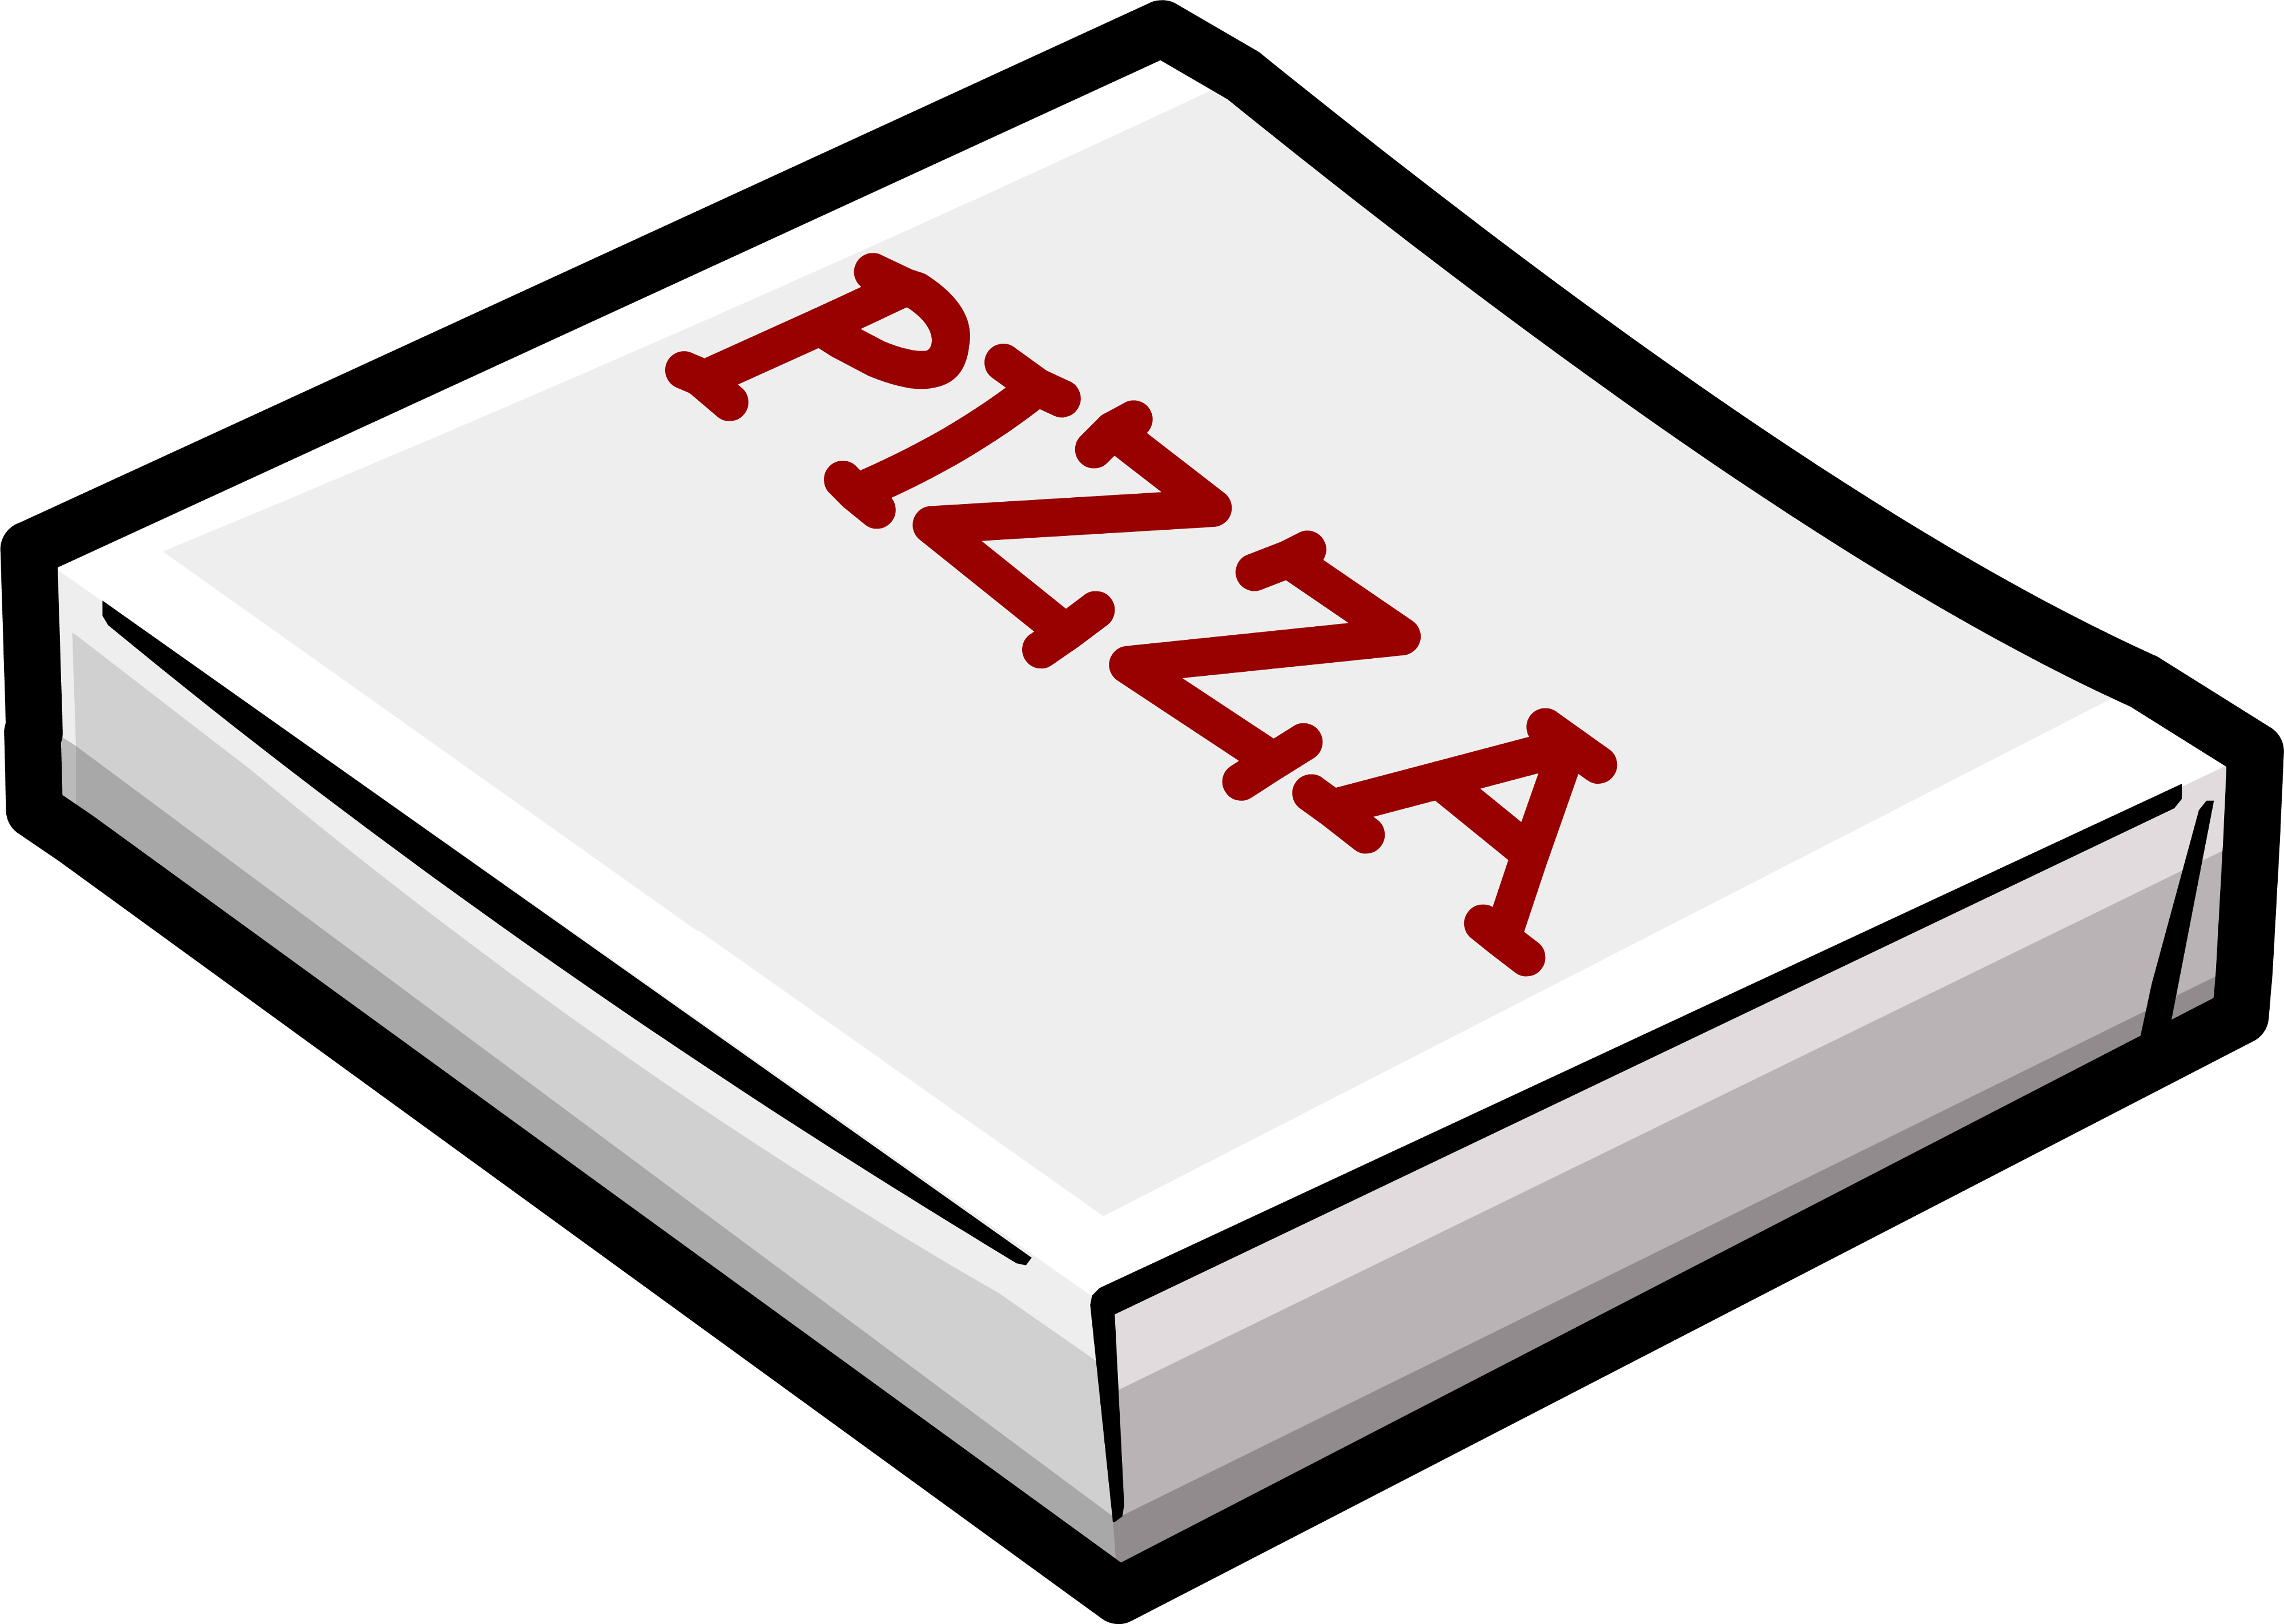 pizza clipart black and white free - photo #18